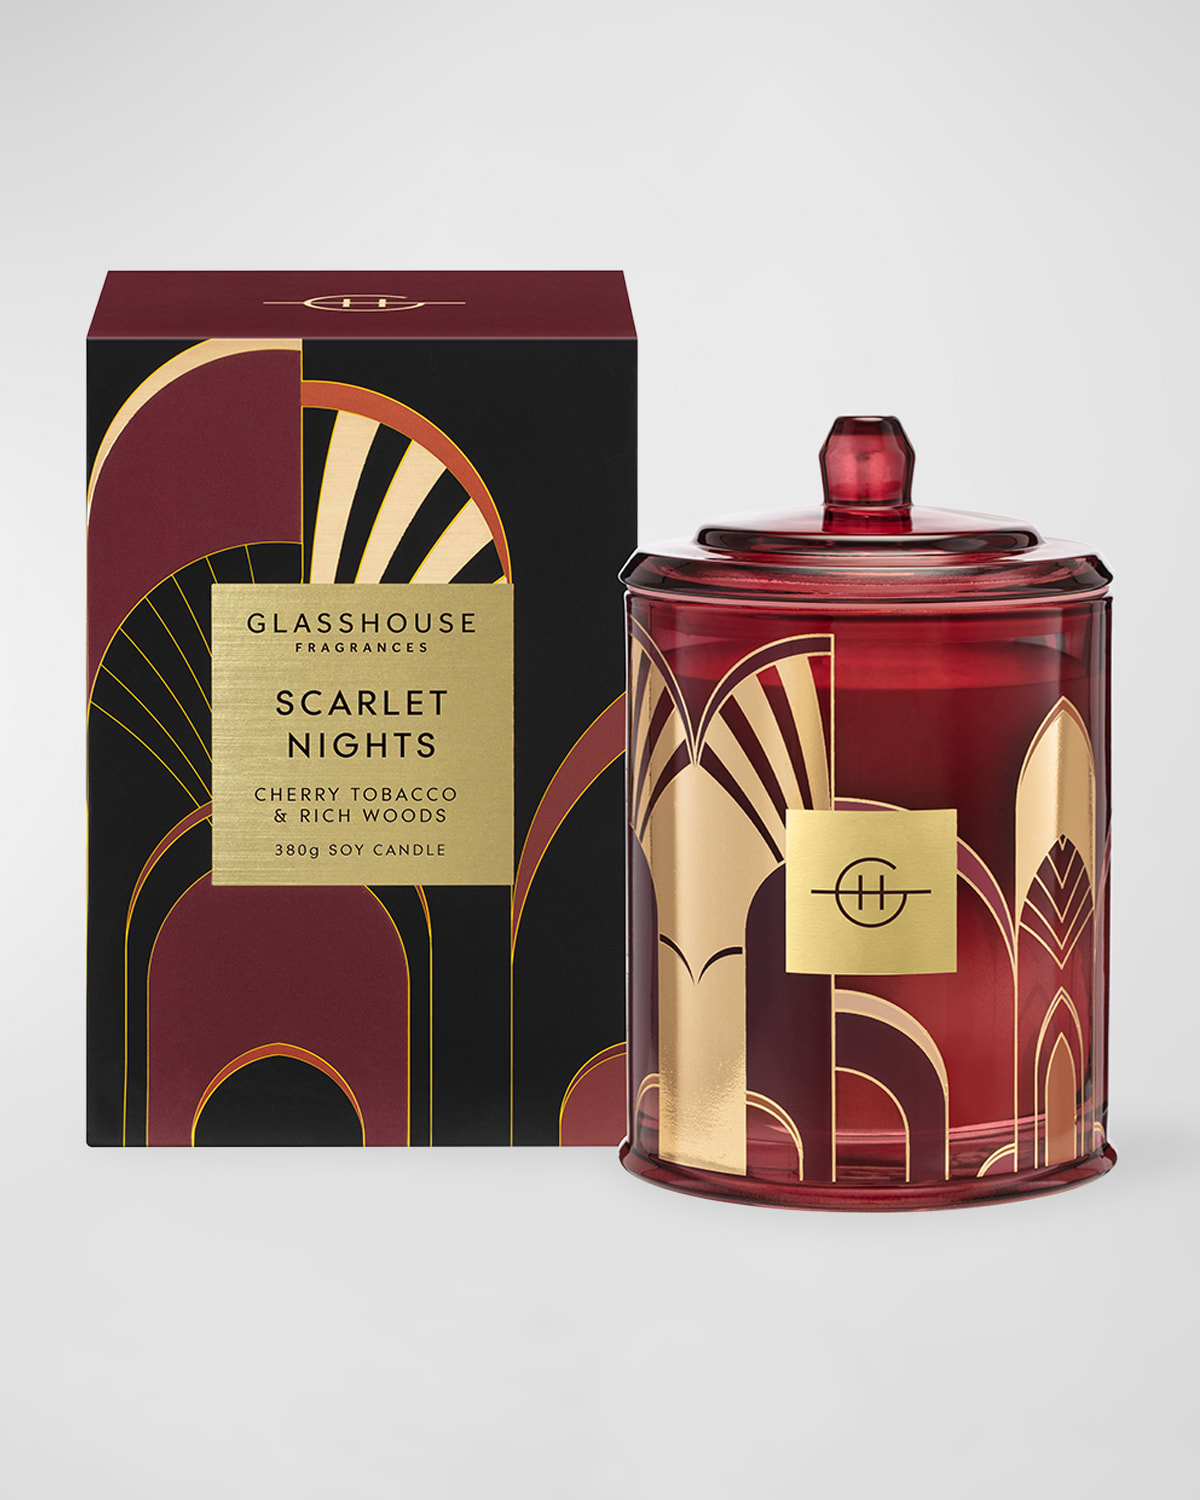 Glasshouse Fragrances 13.4 Oz. Scarlet Nights Cherry Tobacco And Rich Woods Soy Candle